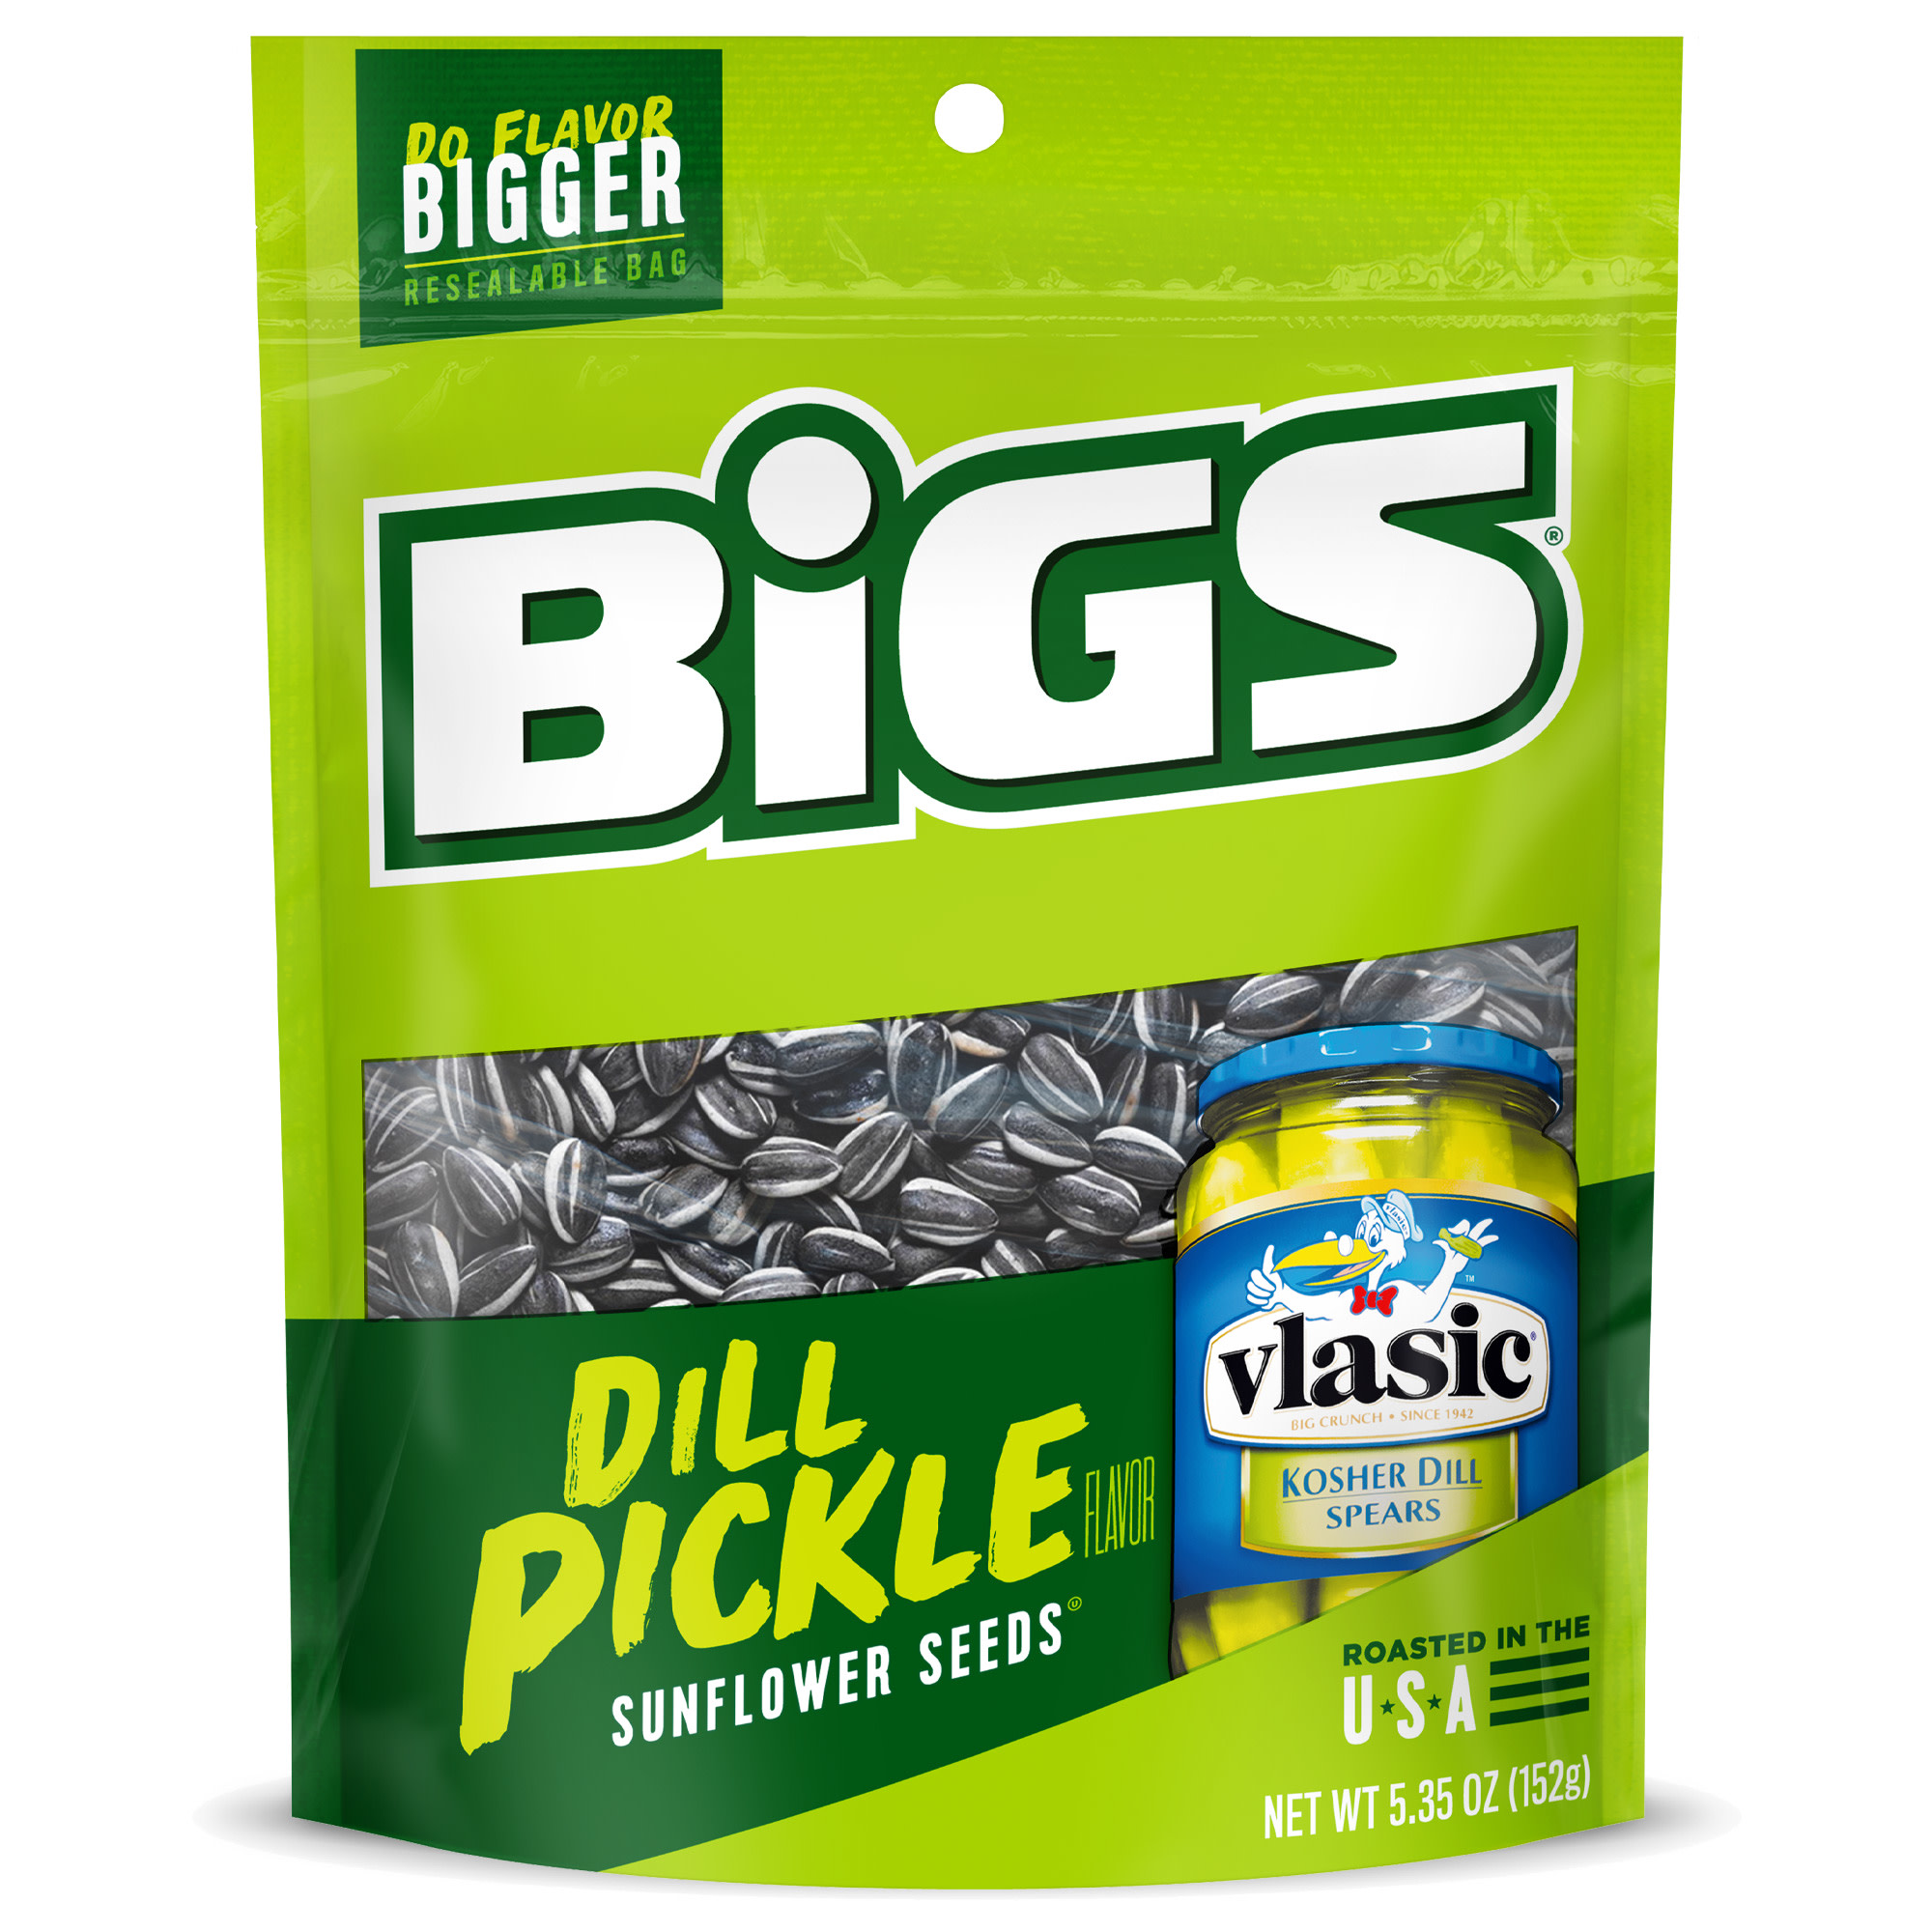 Bigs Vlasic Dill Pickle Sunflower Seeds, 5.35 oz. Bag - image 1 of 8